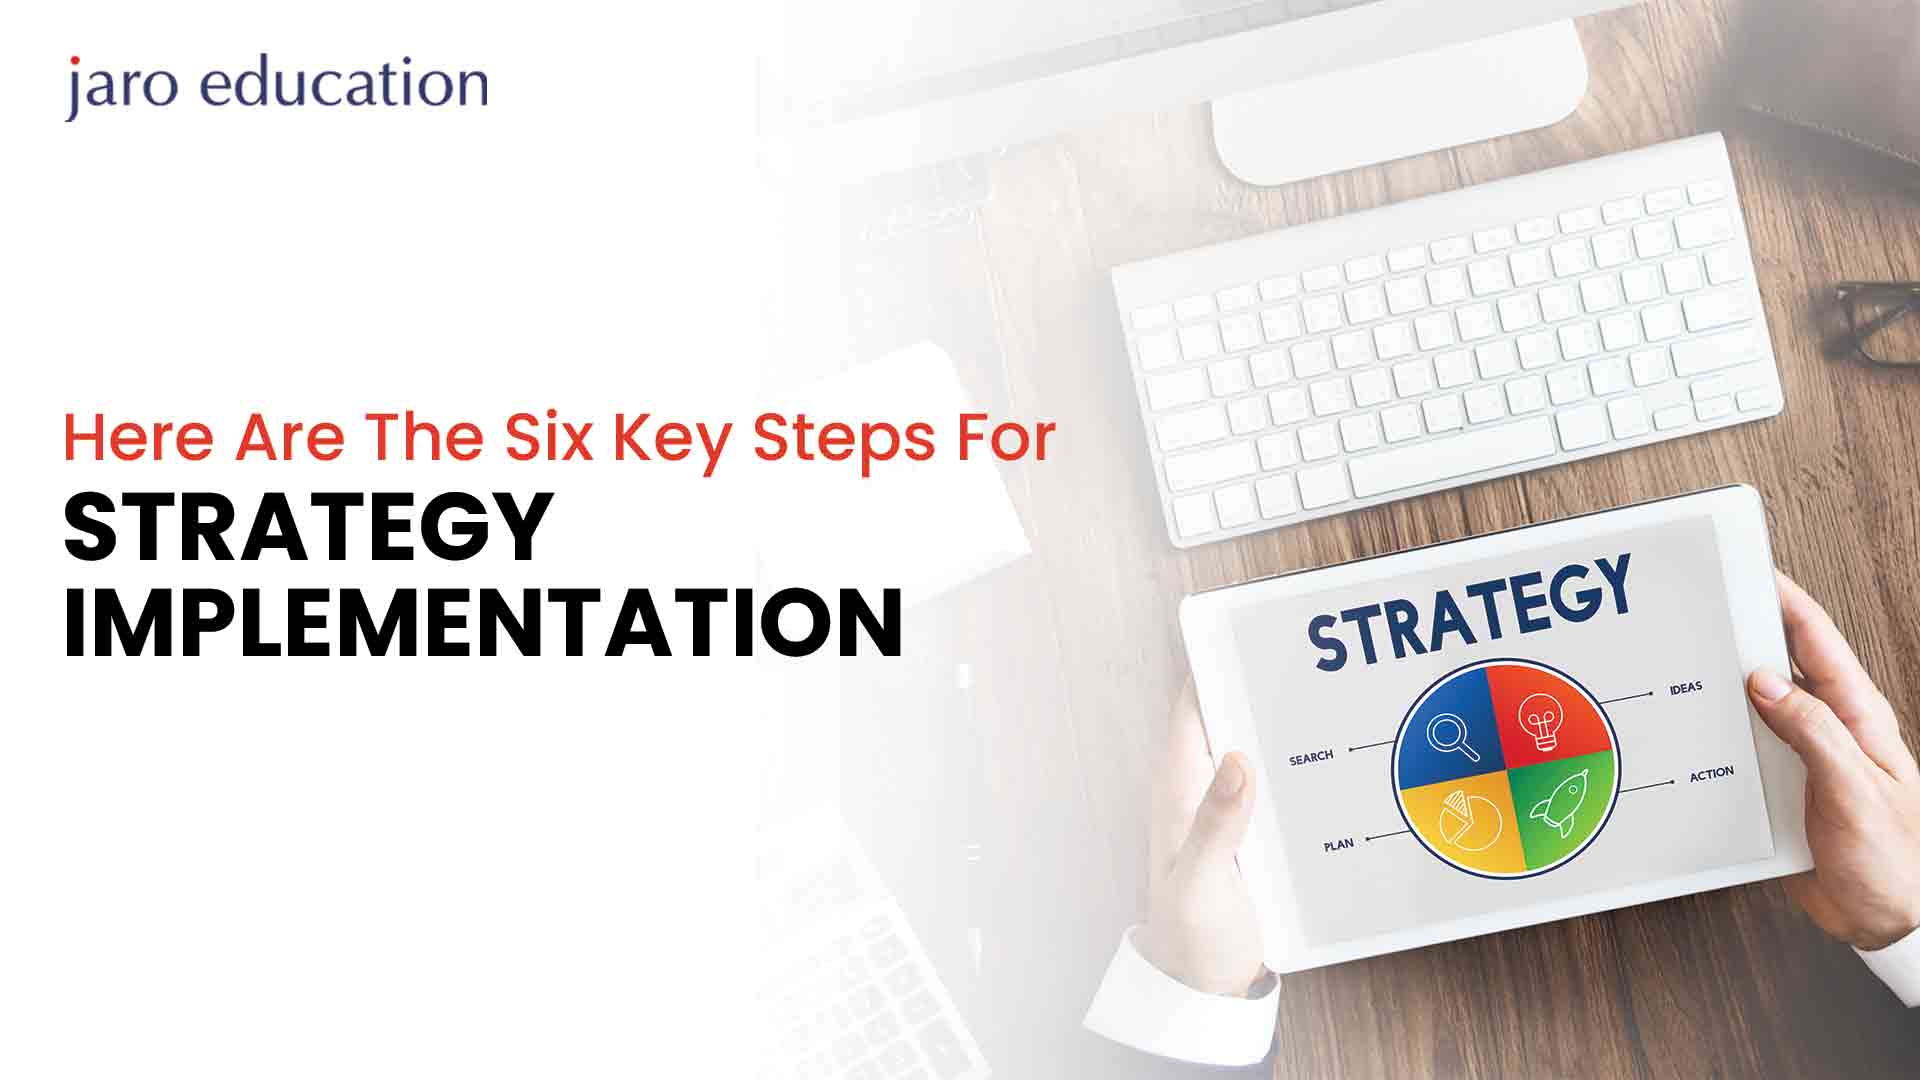 Here Are The Six Key Steps For Strategy Implementation